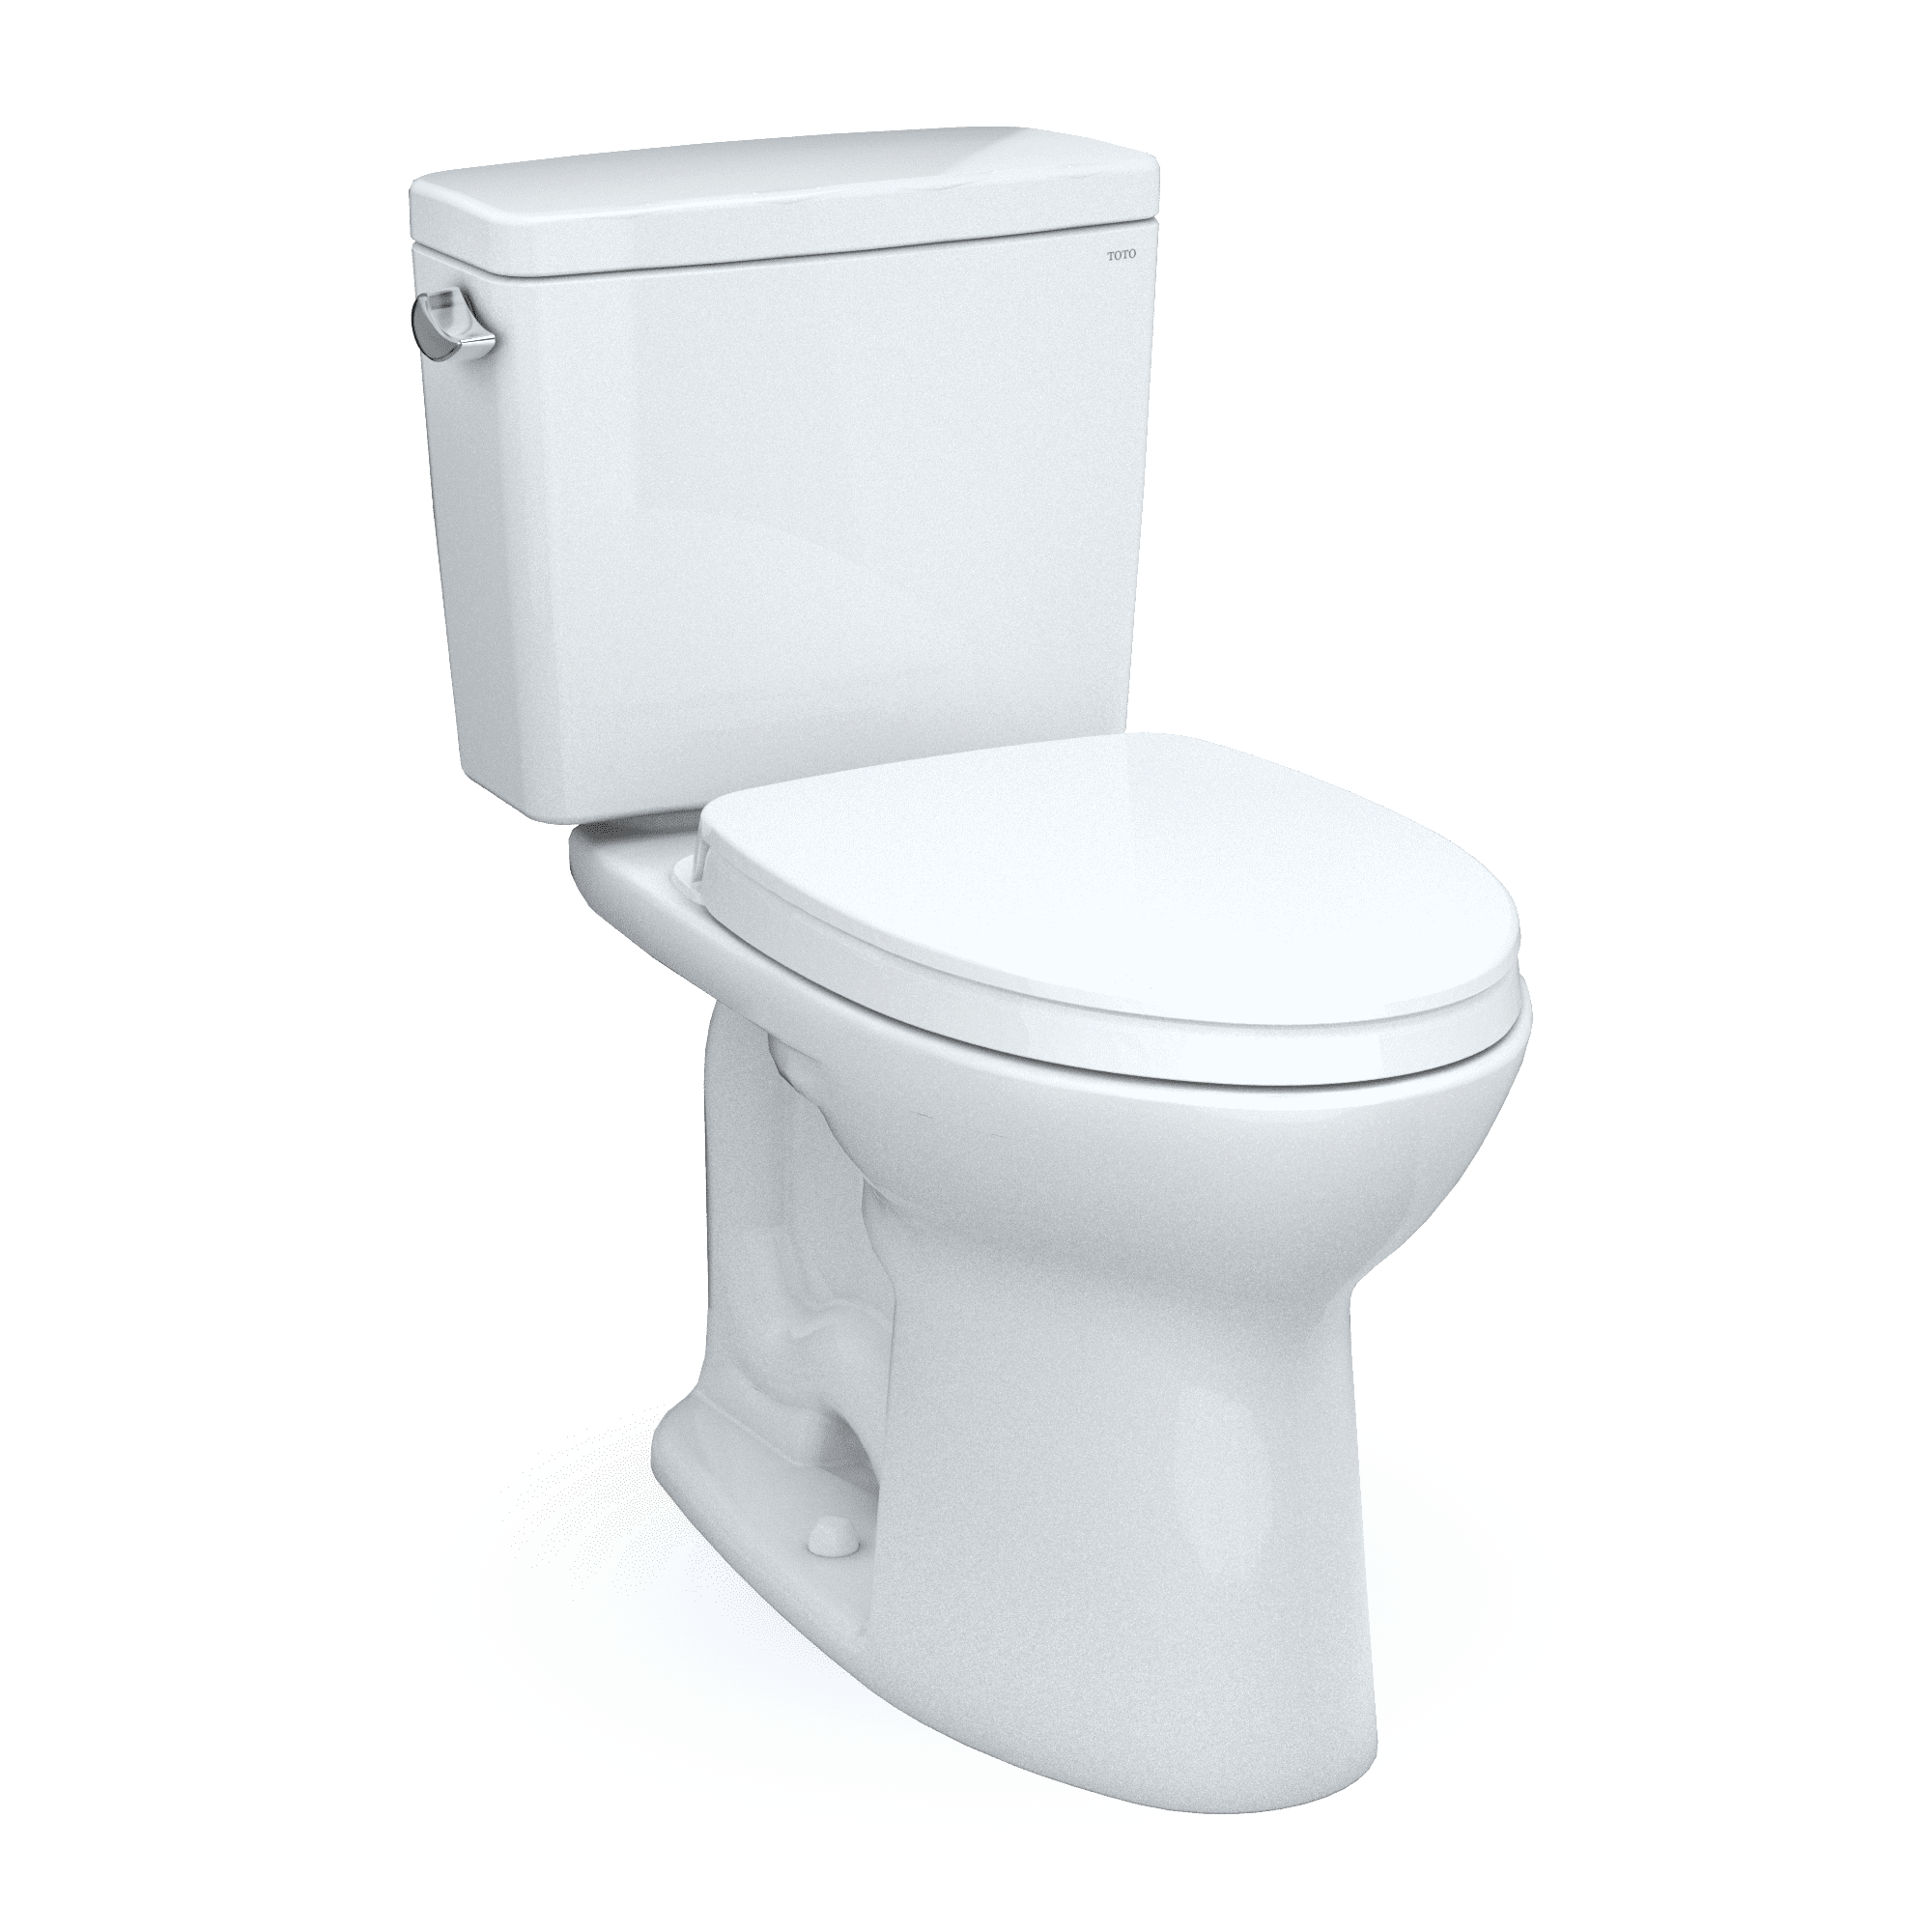 Elegant White Vitreous China Elongated Two-Piece High-Efficiency Toilet